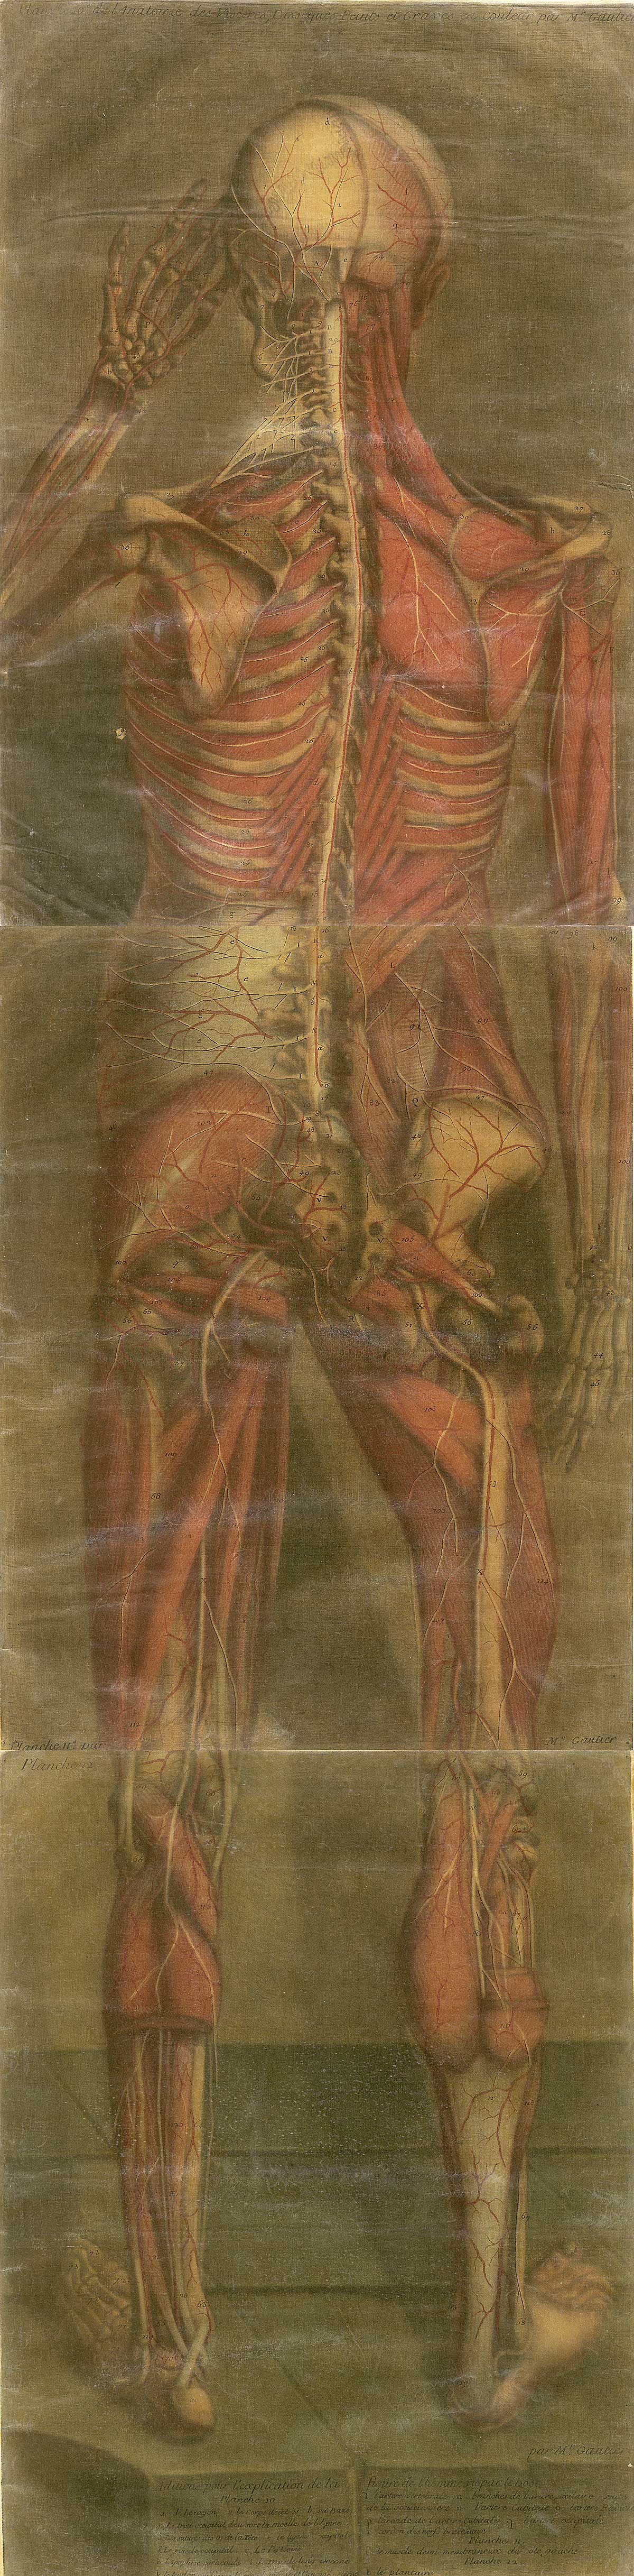 Large color mezzotint of a male figure with his back to the viewer with flesh removed to reveal the muscles, circulatory system, internal organs, and reproductive system; from Jacques Fabian Gautier d’Agoty’s Anatomie générale des viscères en situation, NLM Call no.: WZ 260 G283c 1745.